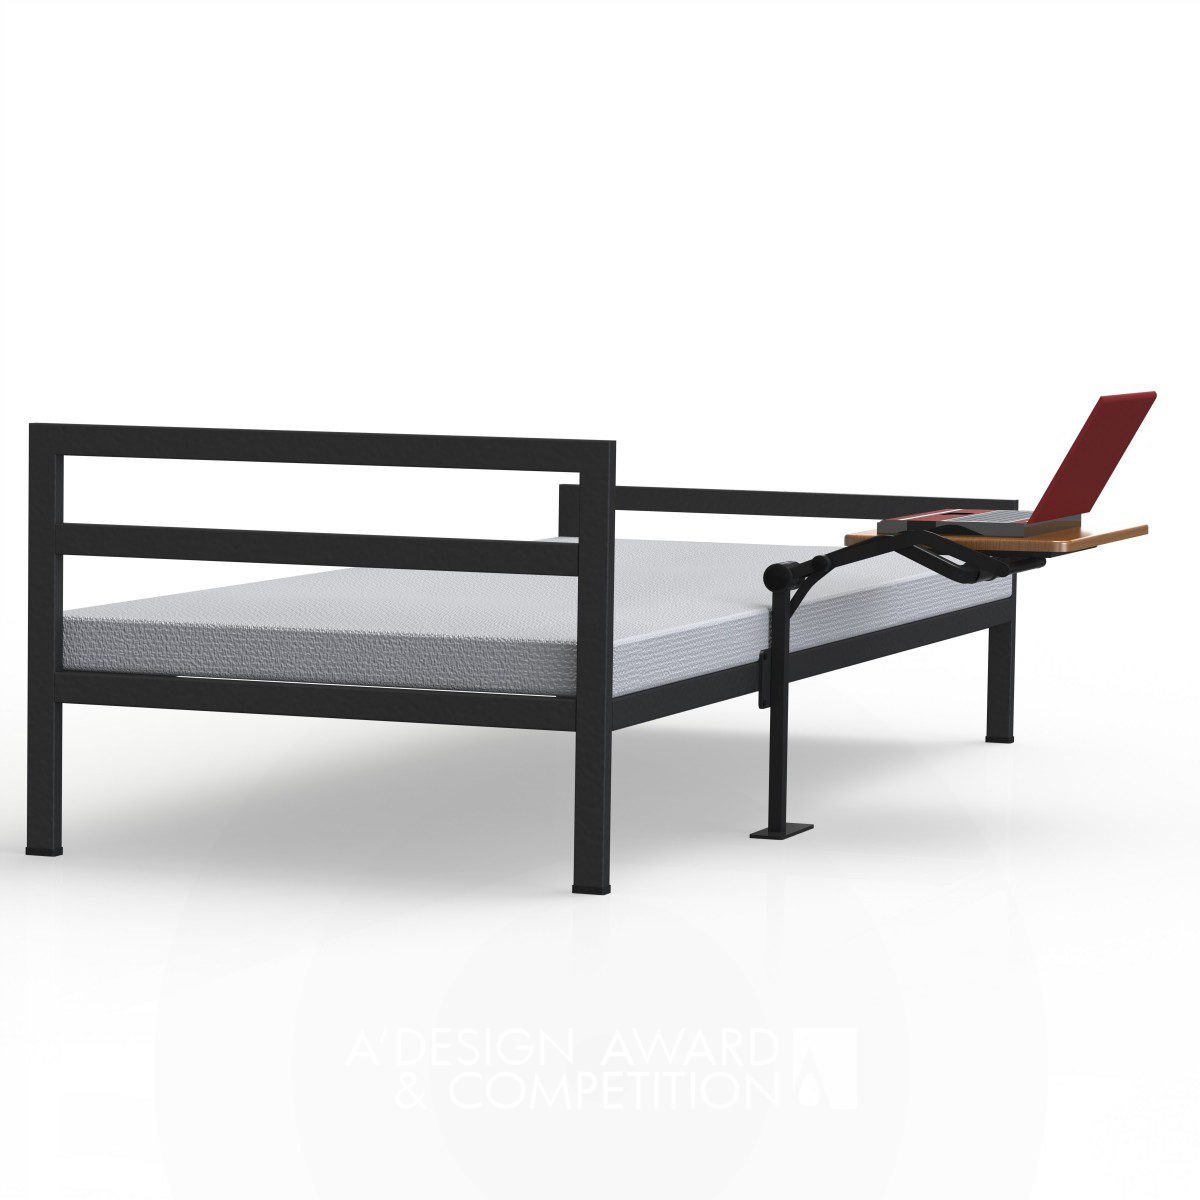 Ergo-table for bed <b>Attachable Swing-away table